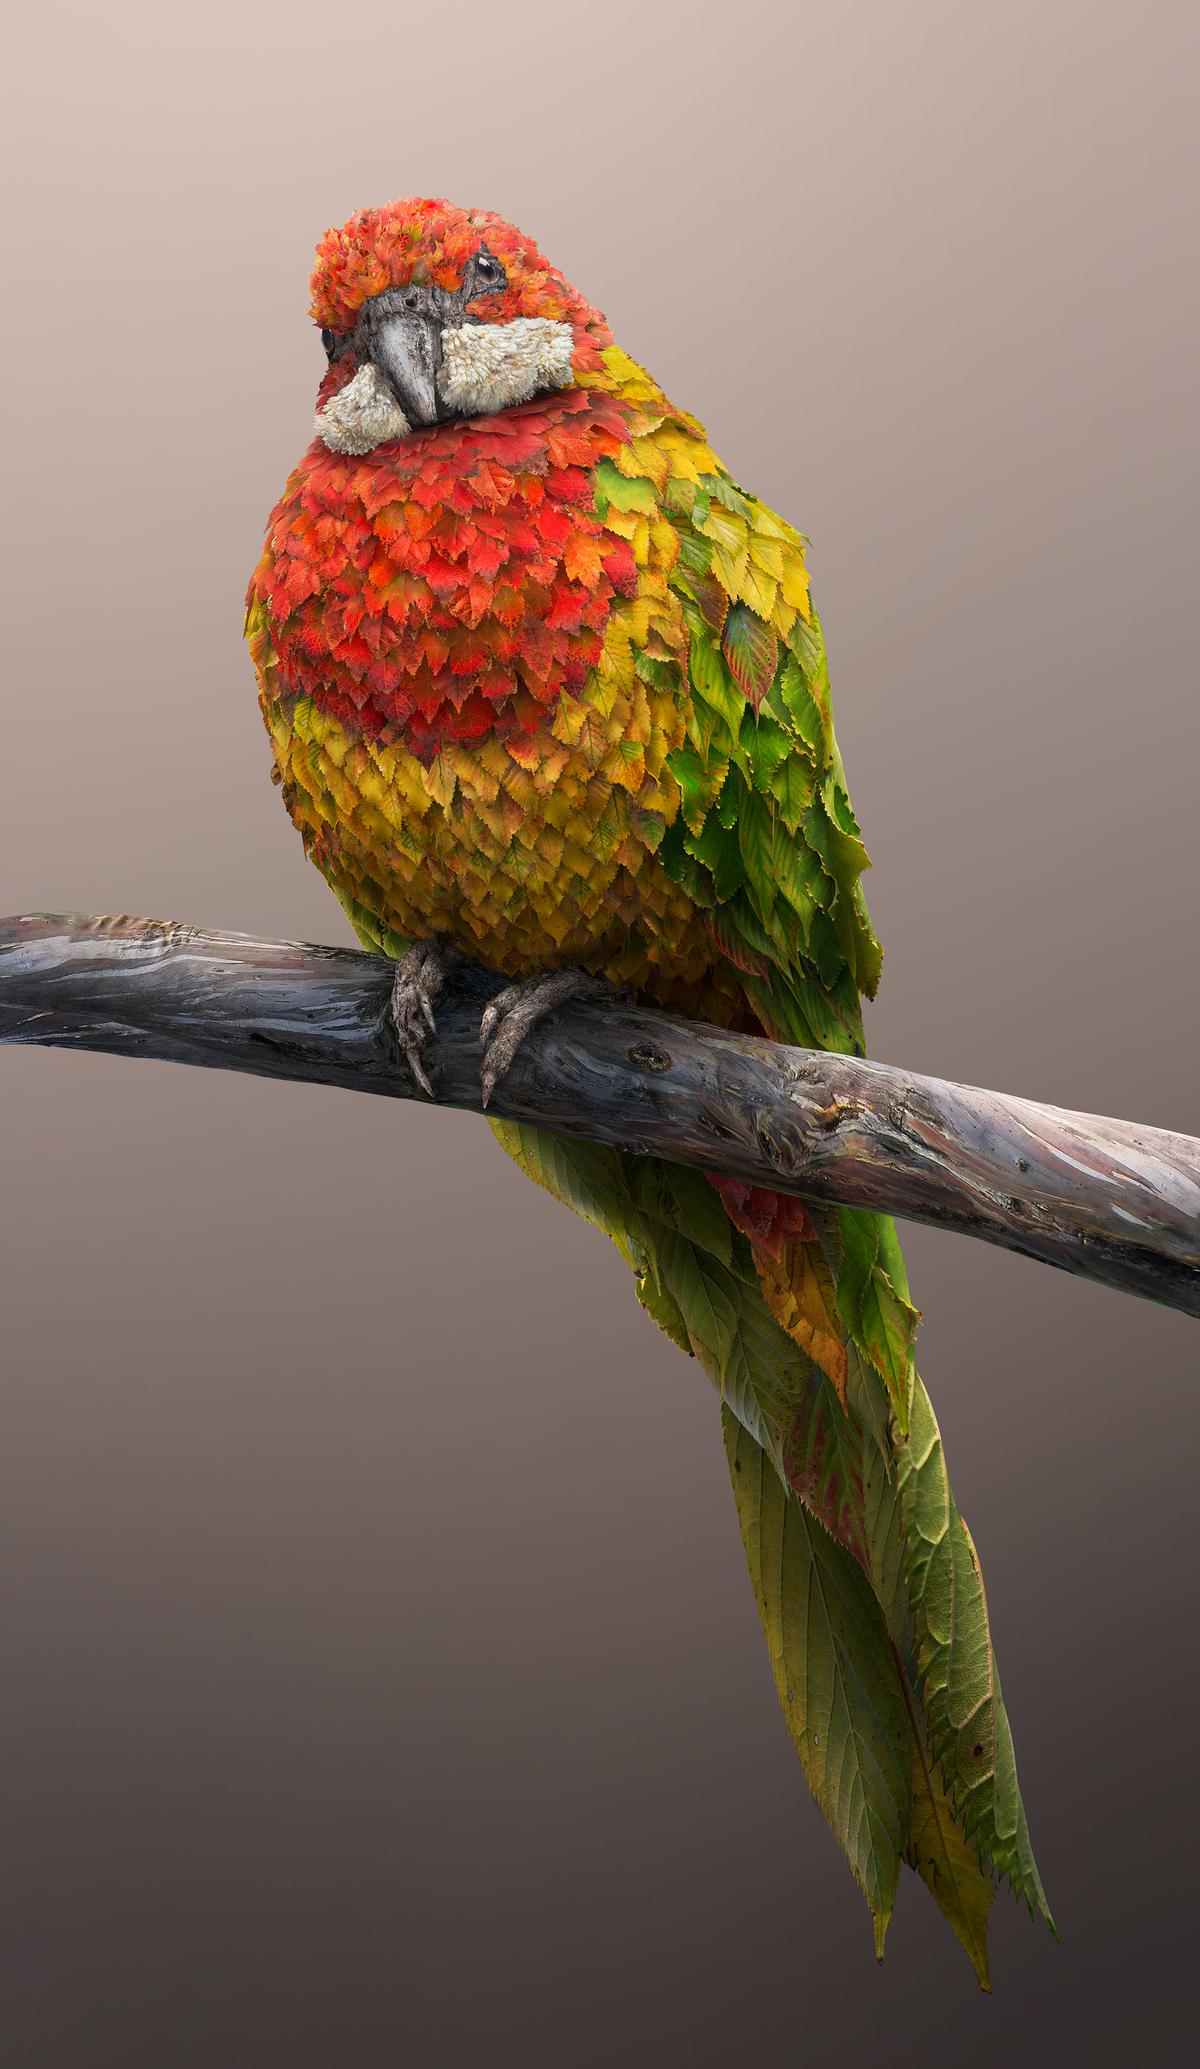 Eastern rosella is composed from different colored leaves. (Courtesy of <a href="https://www.instagram.com/joshdykgraaf/">Josh Dykgraaf</a>)